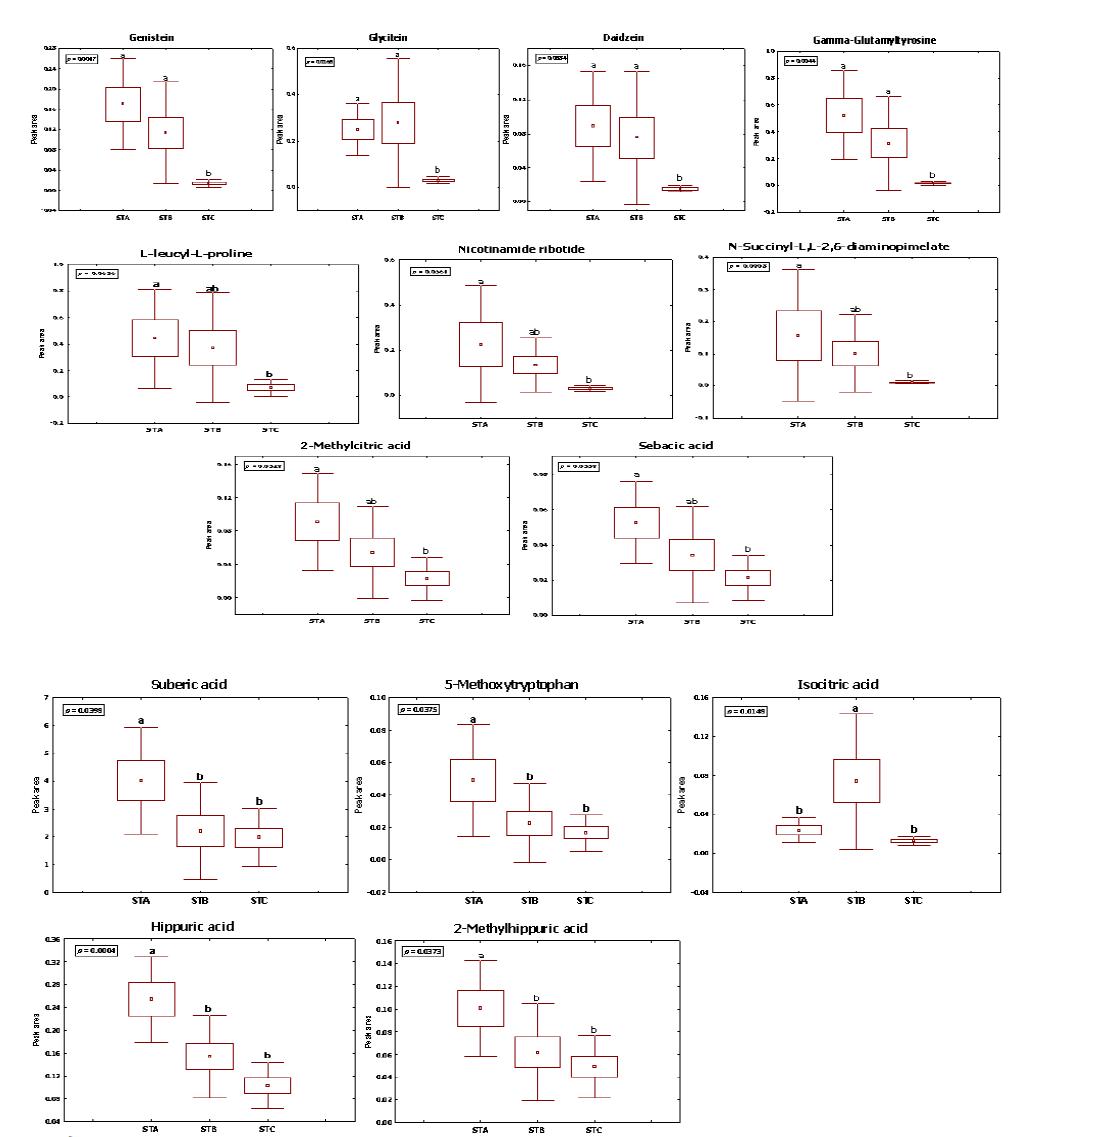 Box and whisker of changes in metabolite levels in STA, STB, and STC groups in urine.